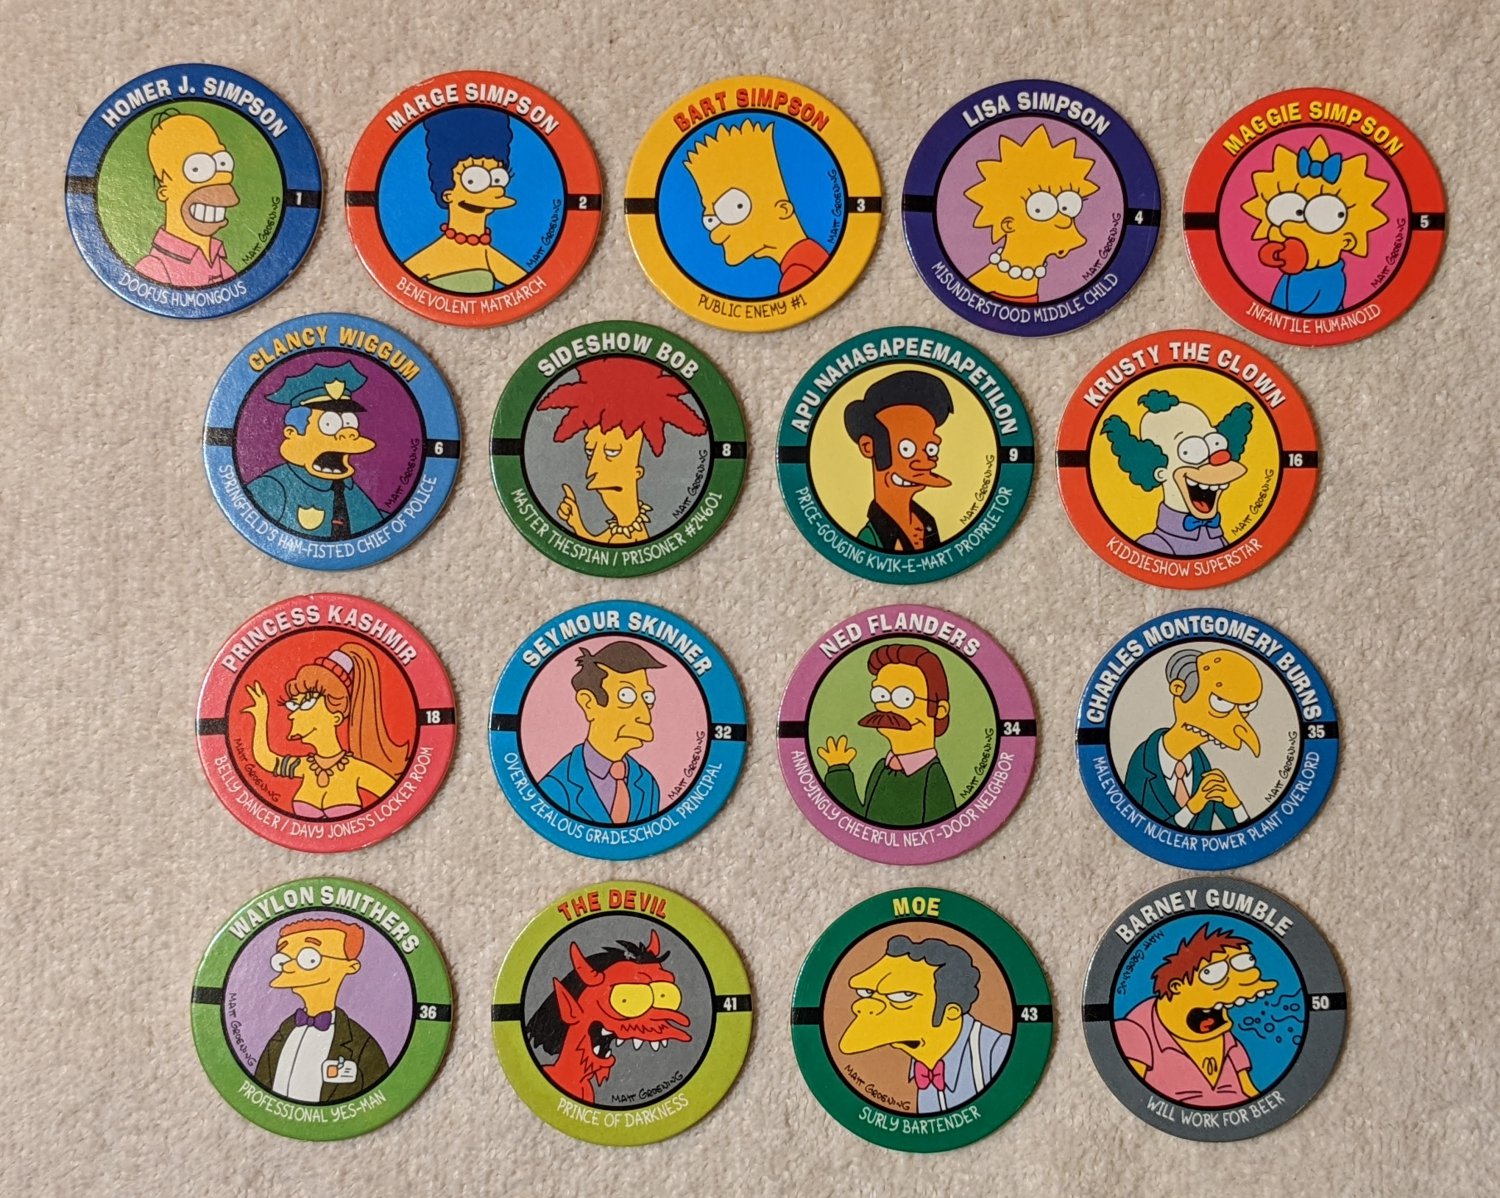 The Simpsons SkyCaps Pogs Bongo Comics 17 Different Tube Container Homer Marge Bart Lisa Maggie 1994